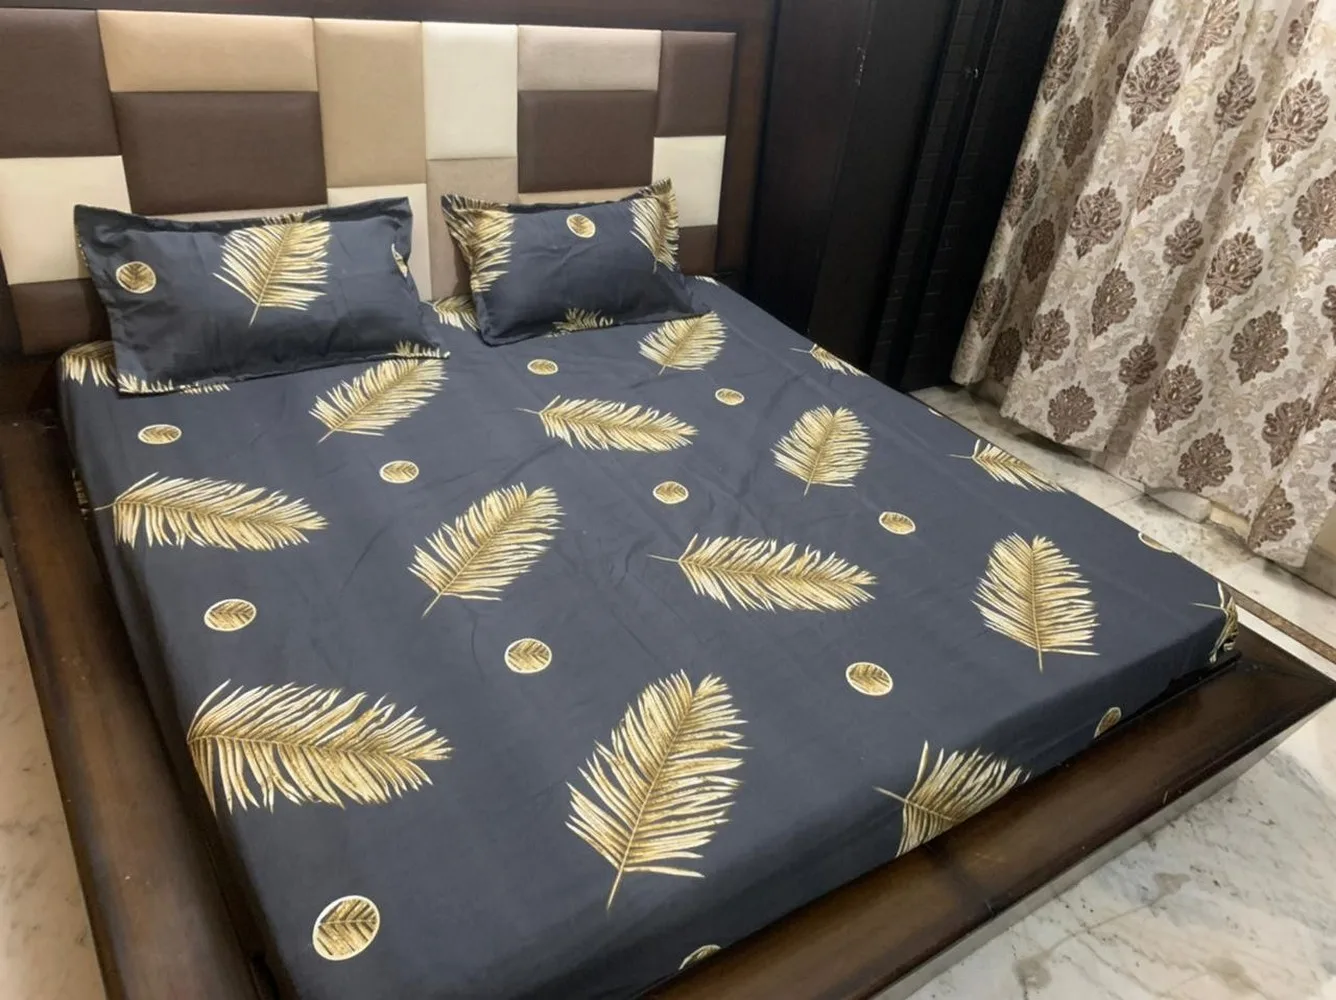 Bedsheet printed, Fitted, Elastic Corner, 90x100, Glace Cotton, 2 Pillow Covers, grey golden leaf design